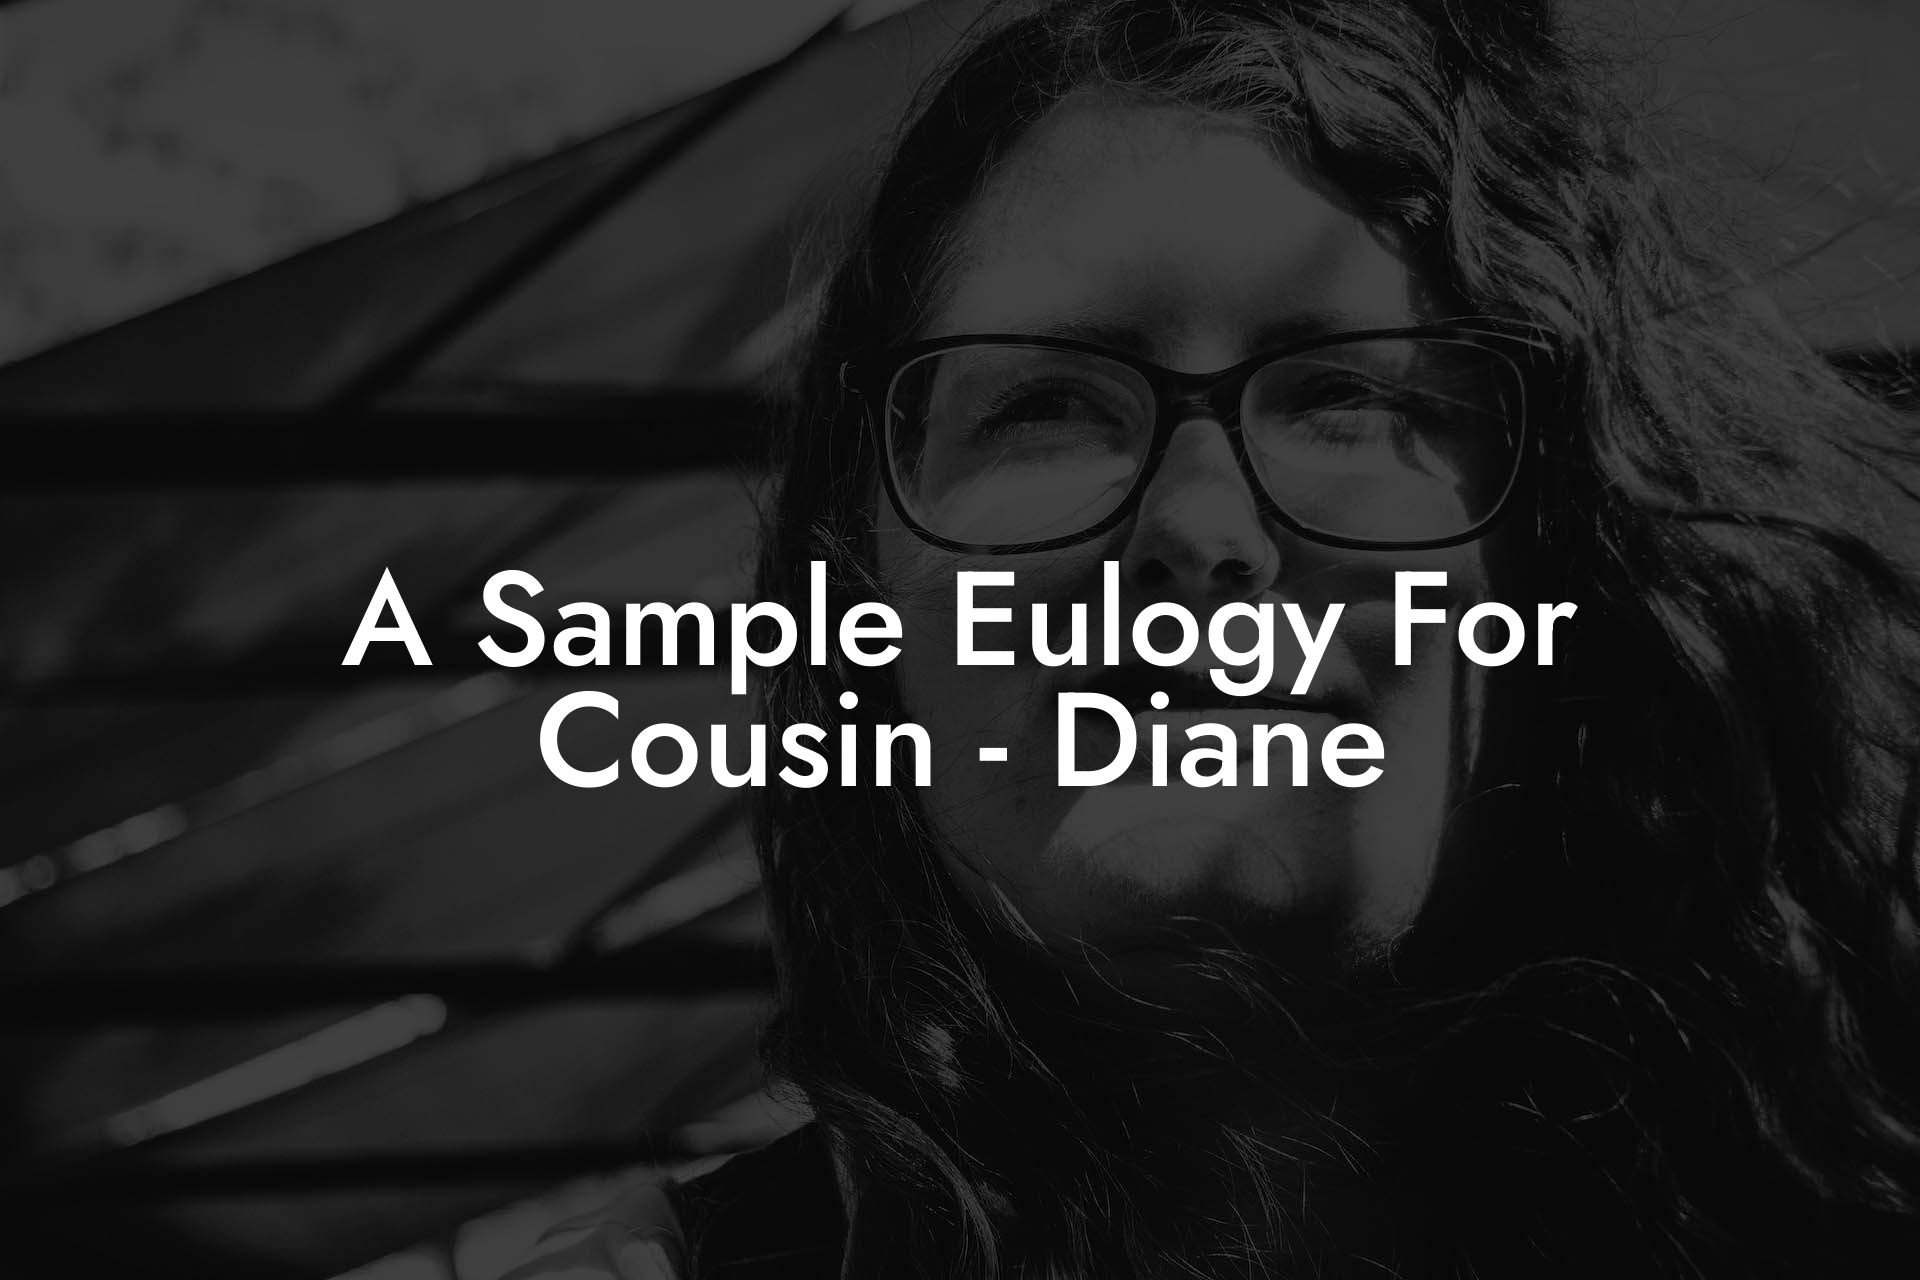 A Sample Eulogy For Cousin - Diane